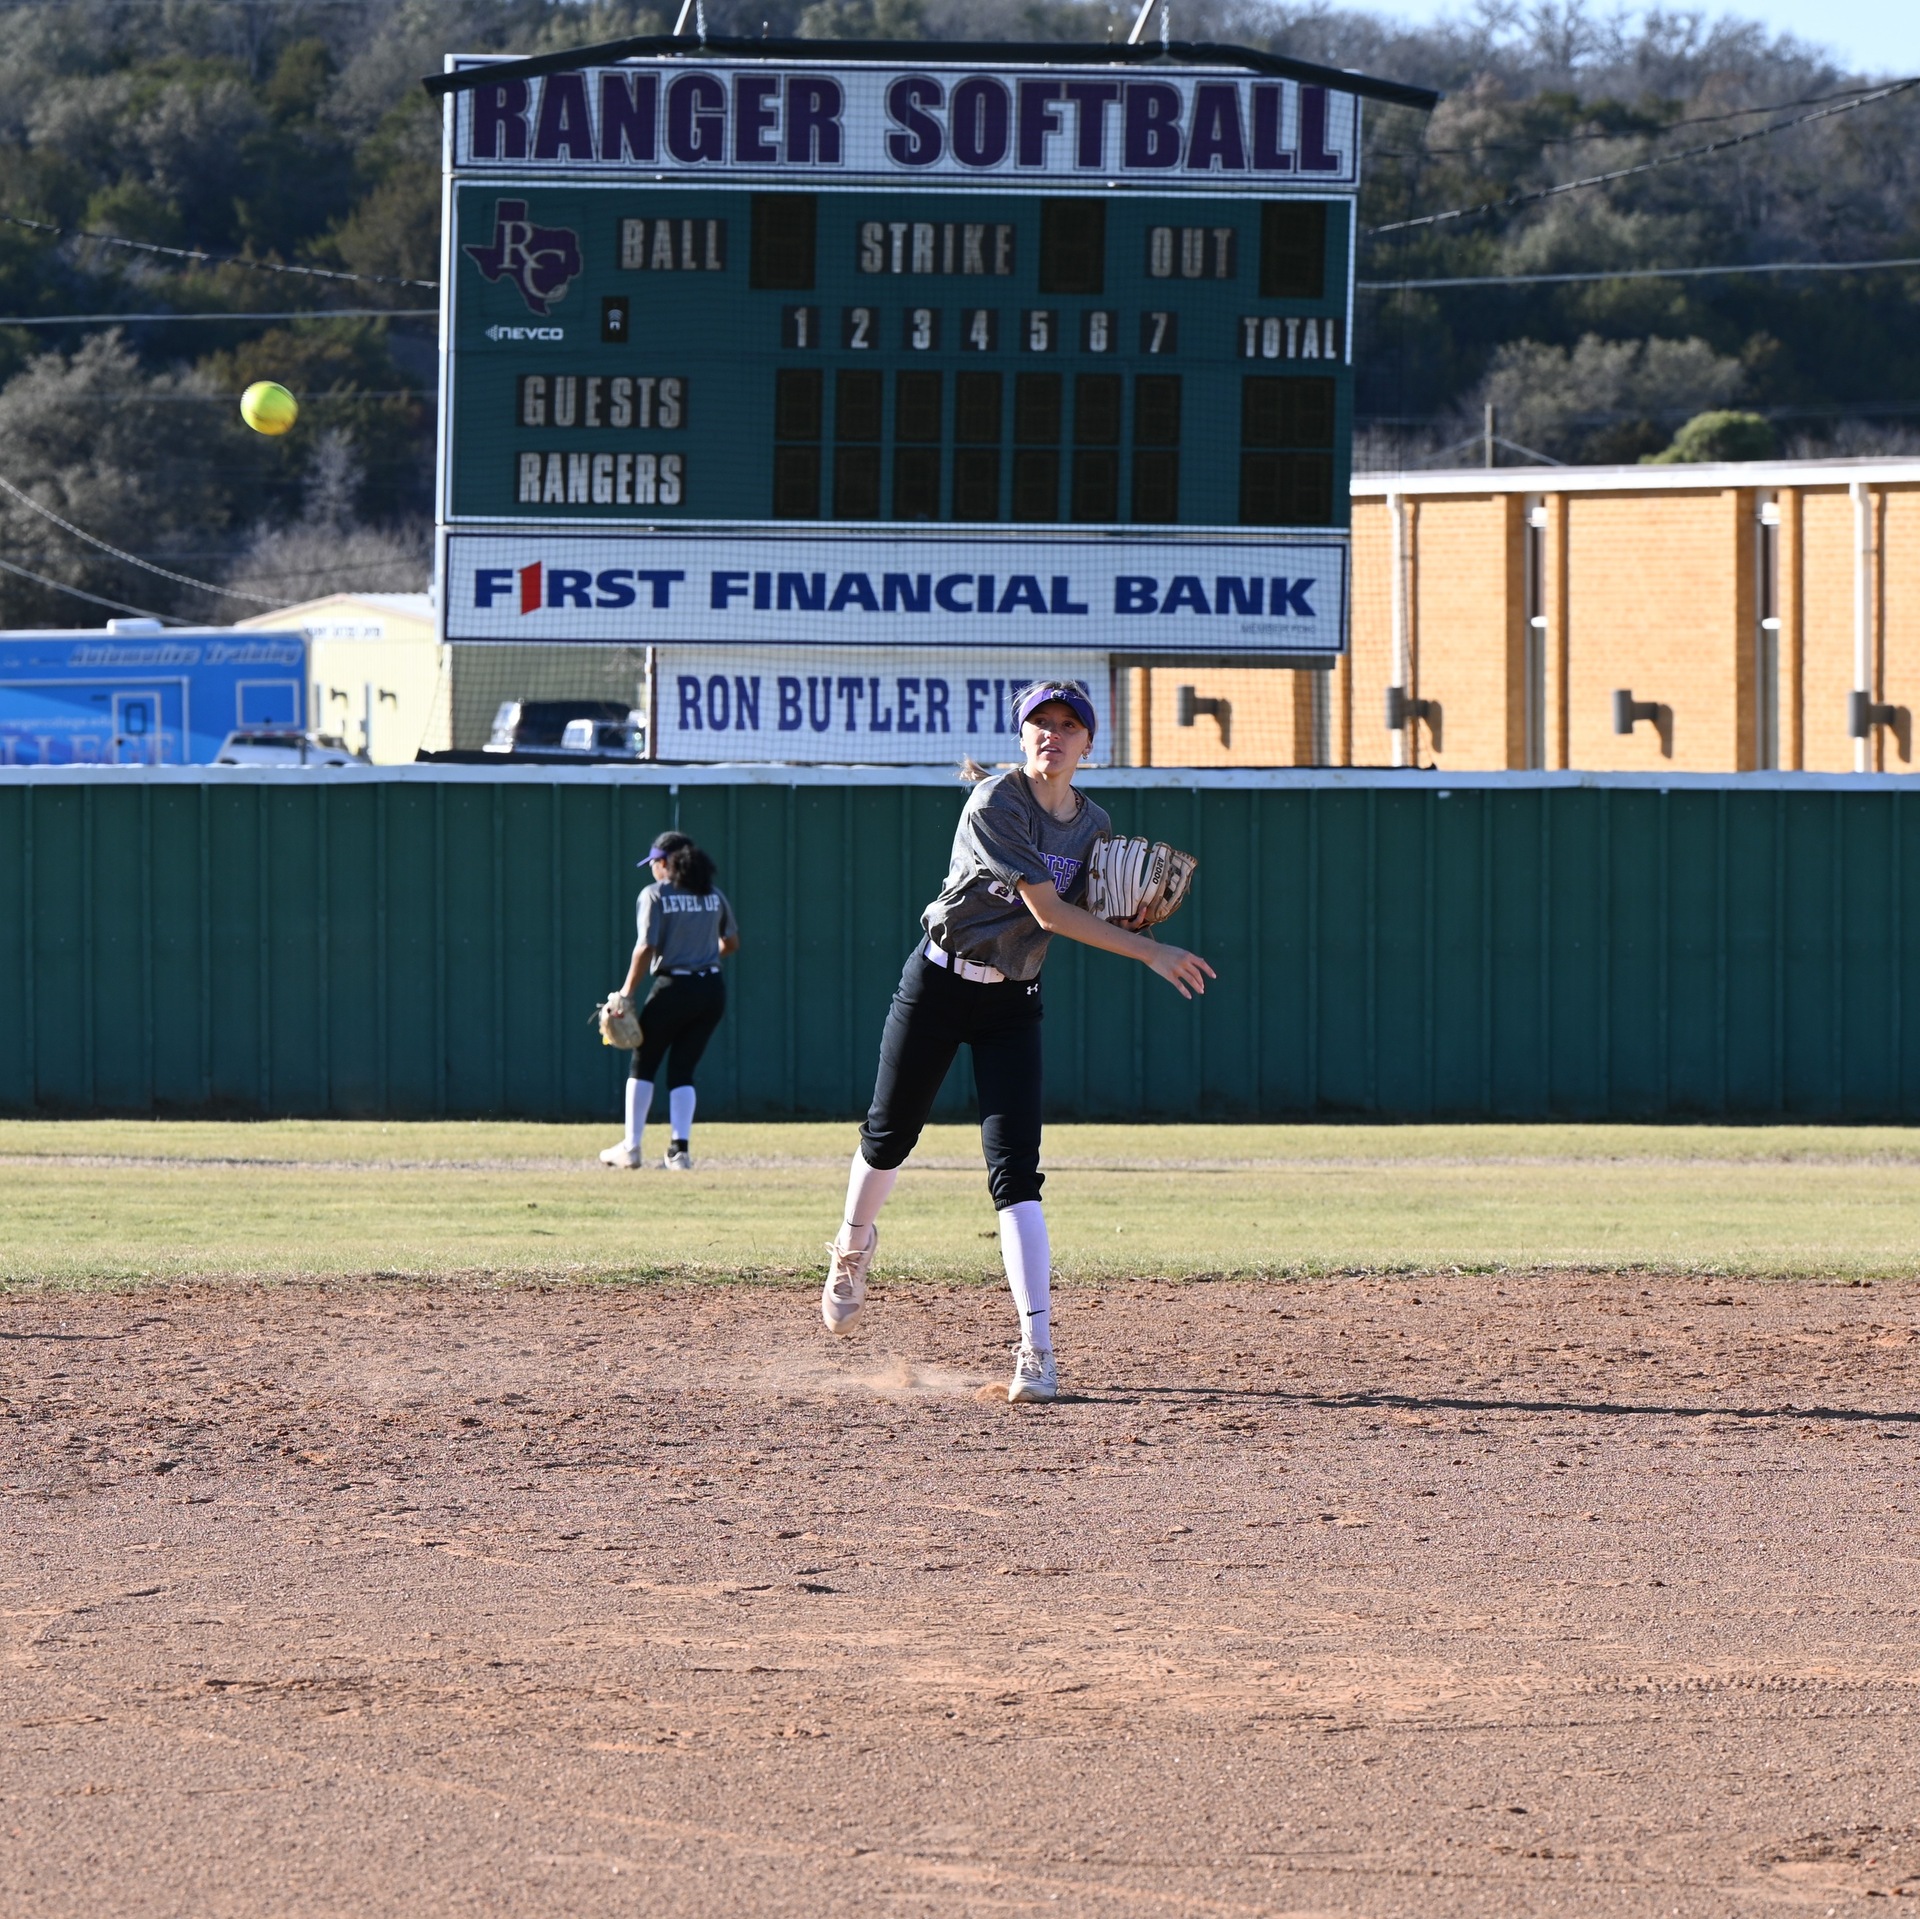 Ranger College Softball traveled to Midland College this past weekend for a 2-game series against the Chaparrals